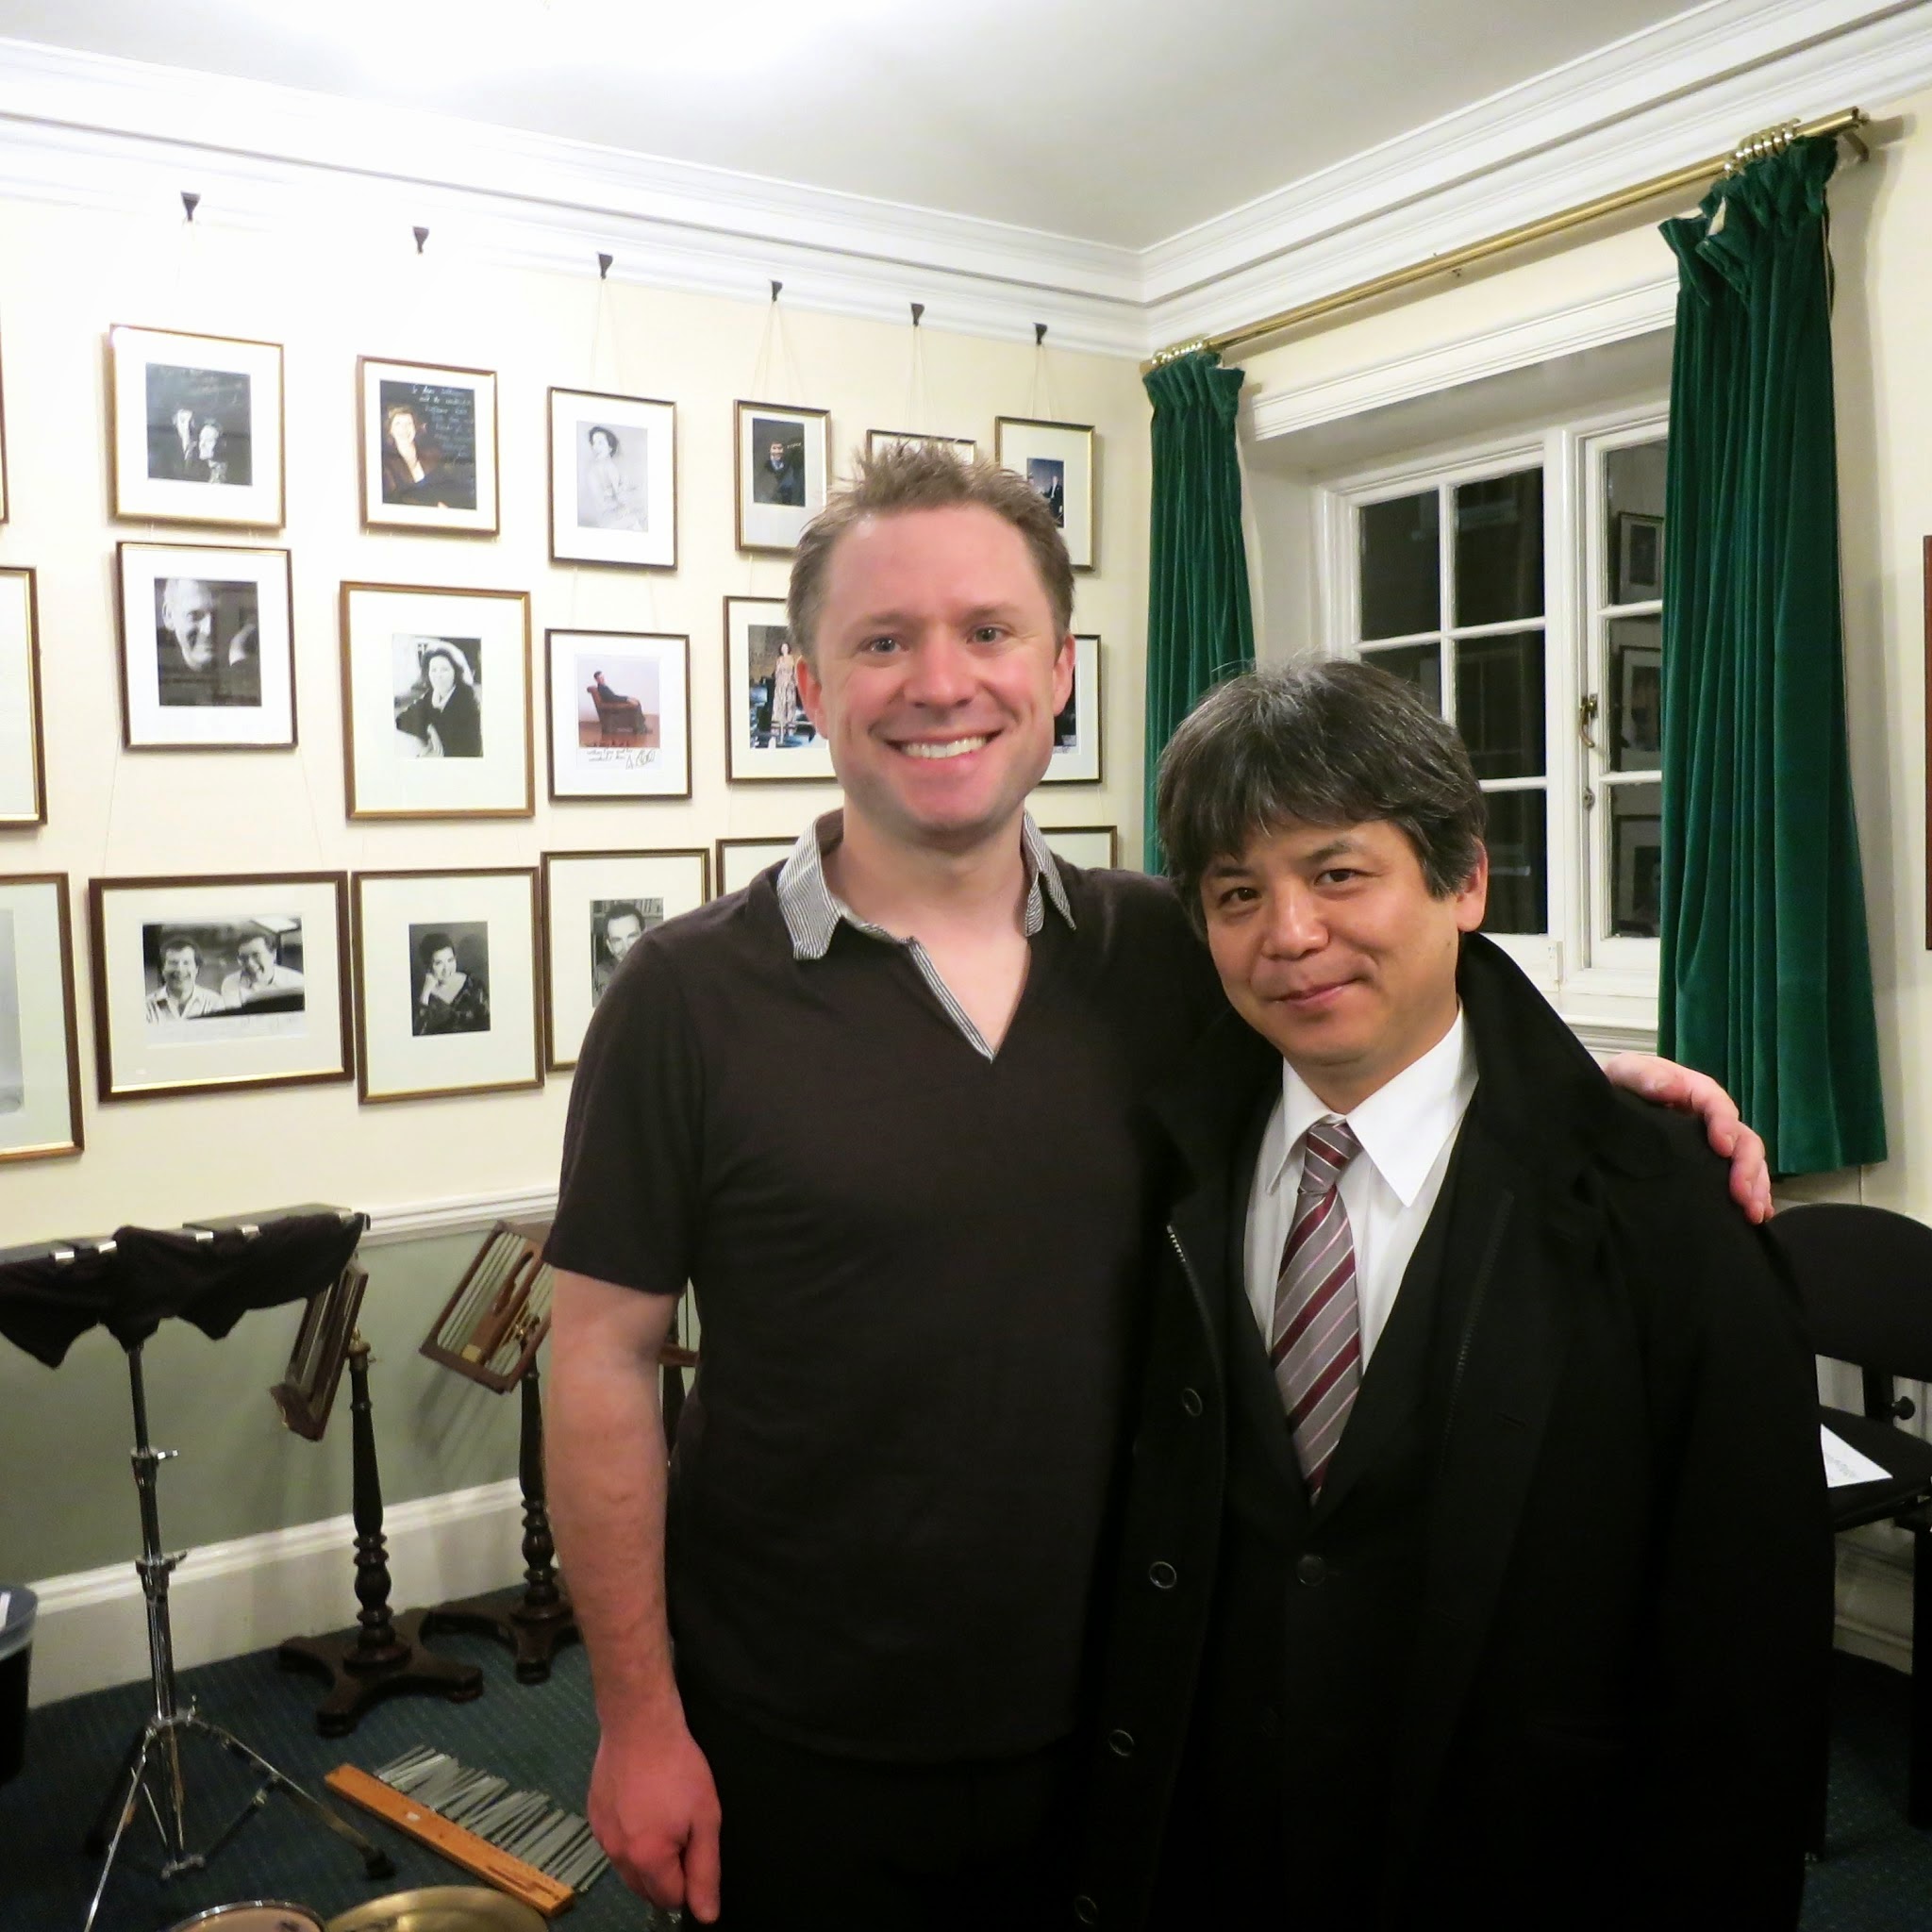 With Toshio Hosokawa at London's Wigmore Hall following my solo recital debut there.